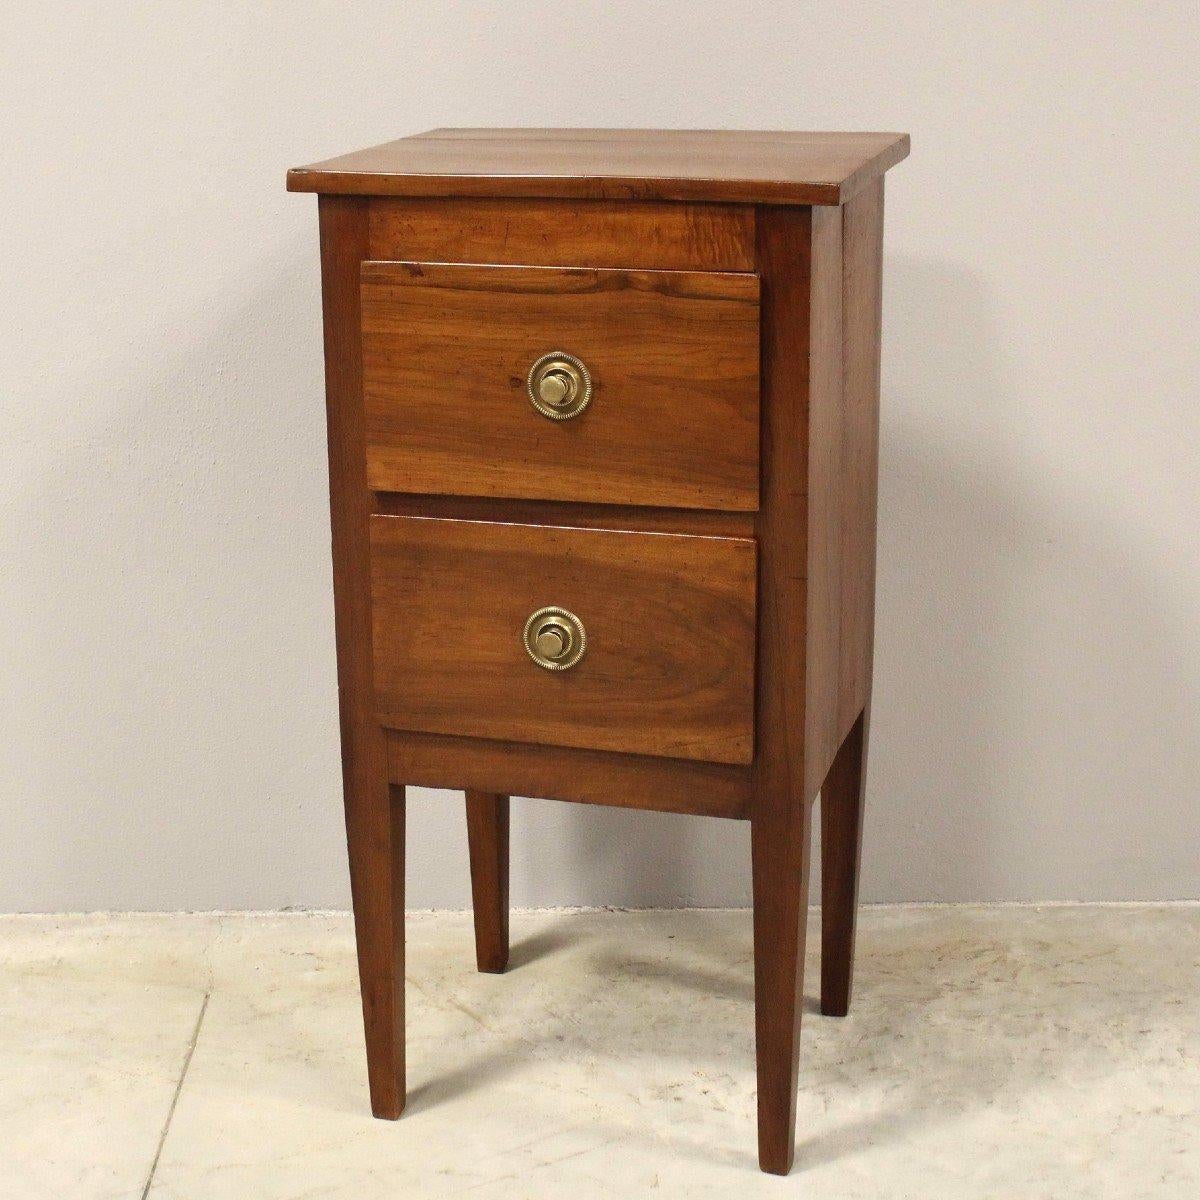 Brass 18th Century Italian Walnut Bedside Table with Two Drawers and Tapered Legs